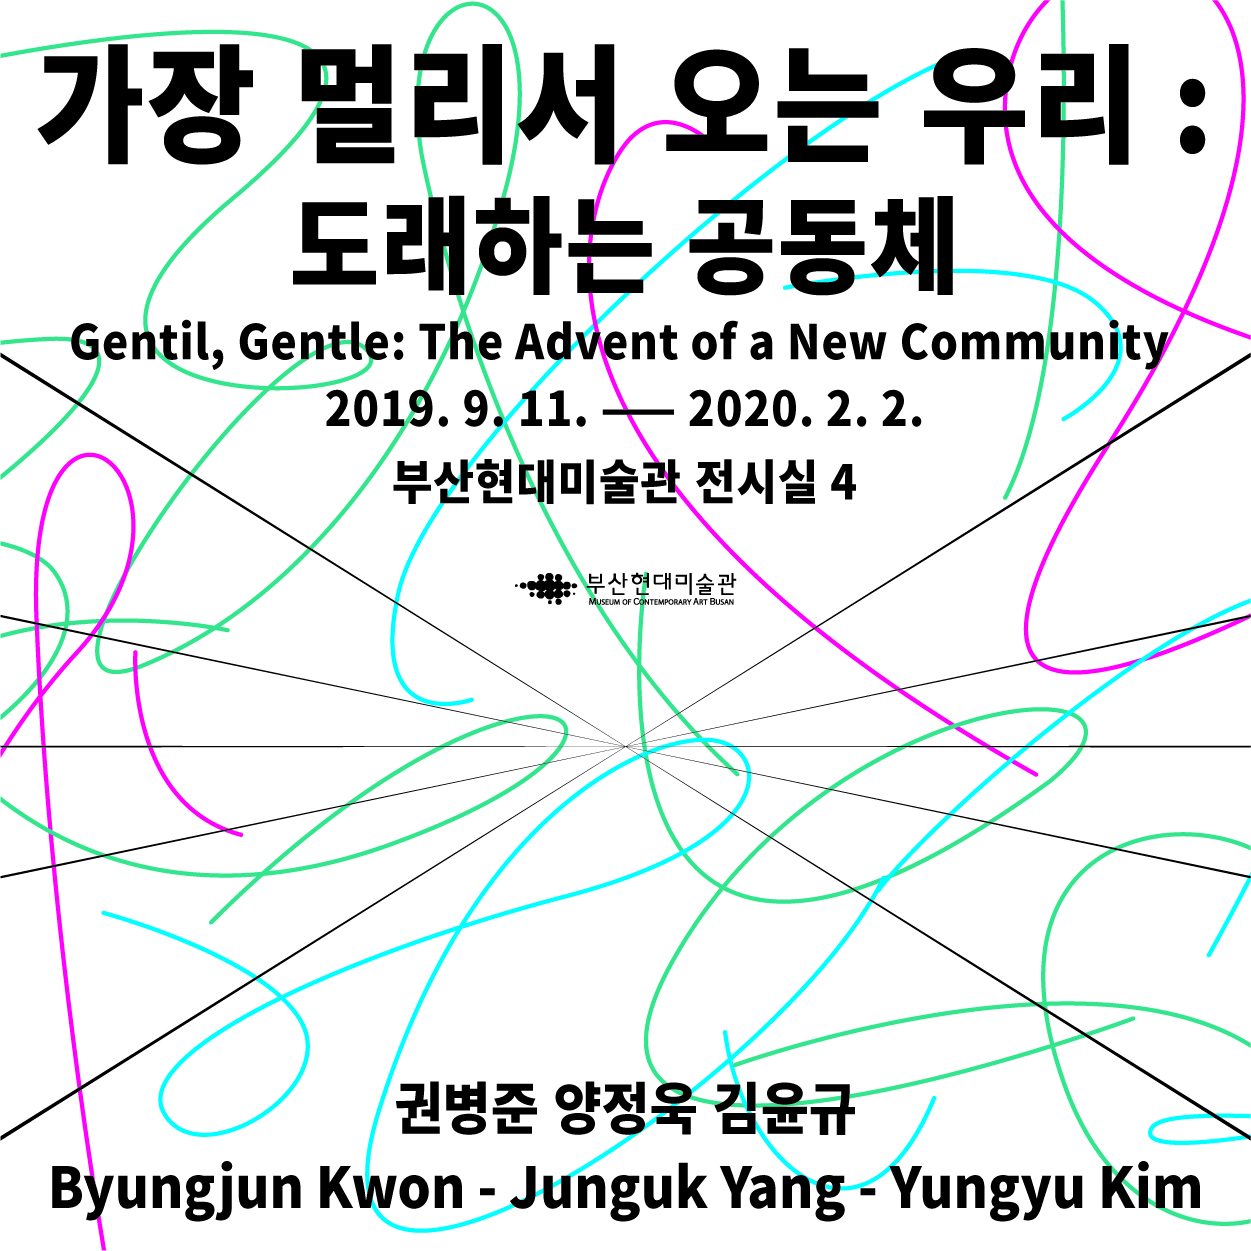 Gentil, Gentle: The Advent of a New Community썸네일